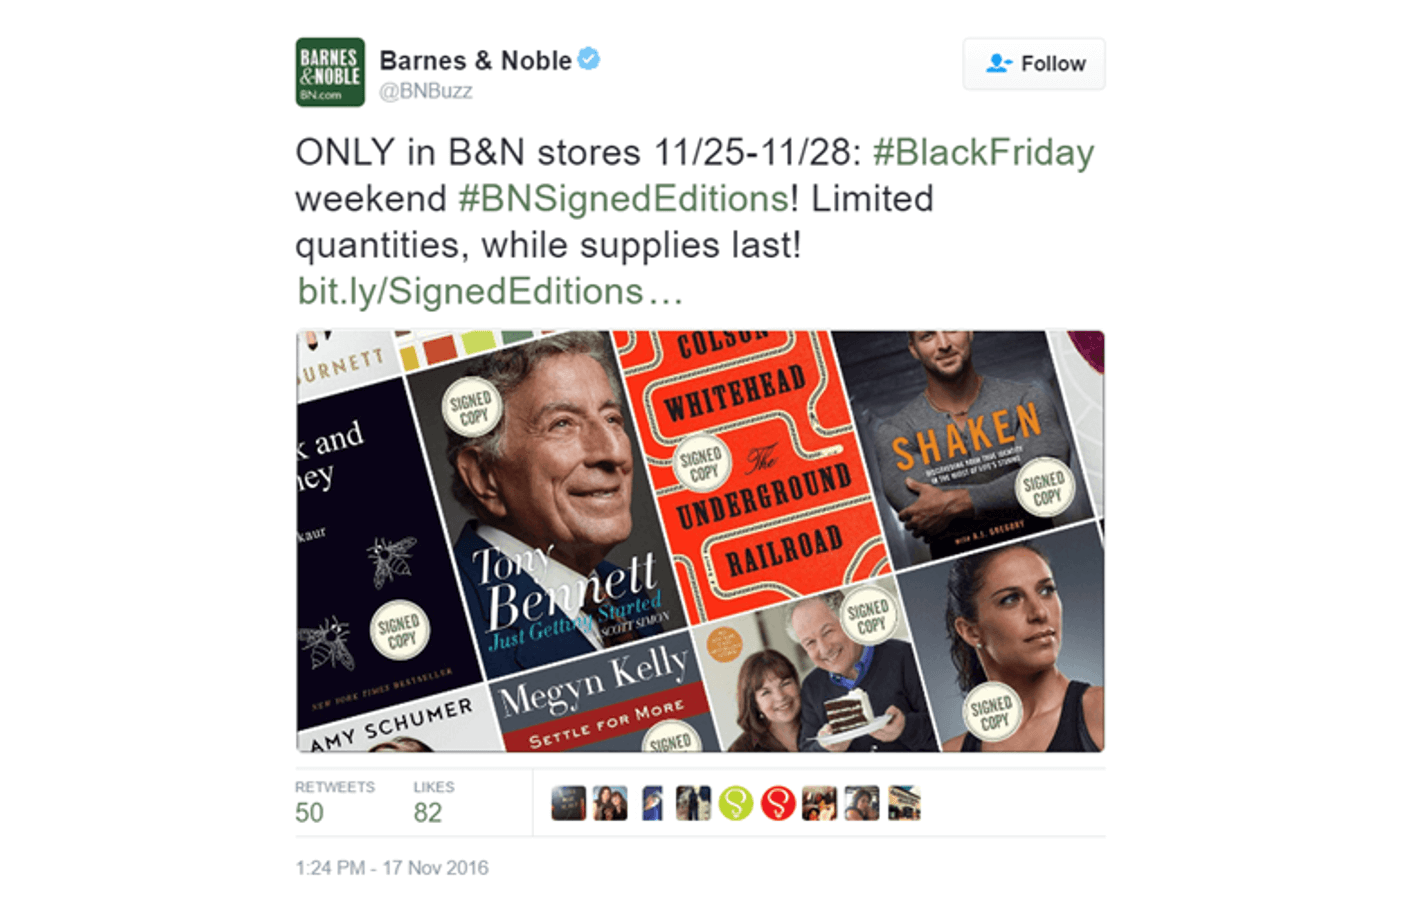 Screenshot of a Tweet announcing the launch of Barnes & Noble’s #BNSignedEditions campaign